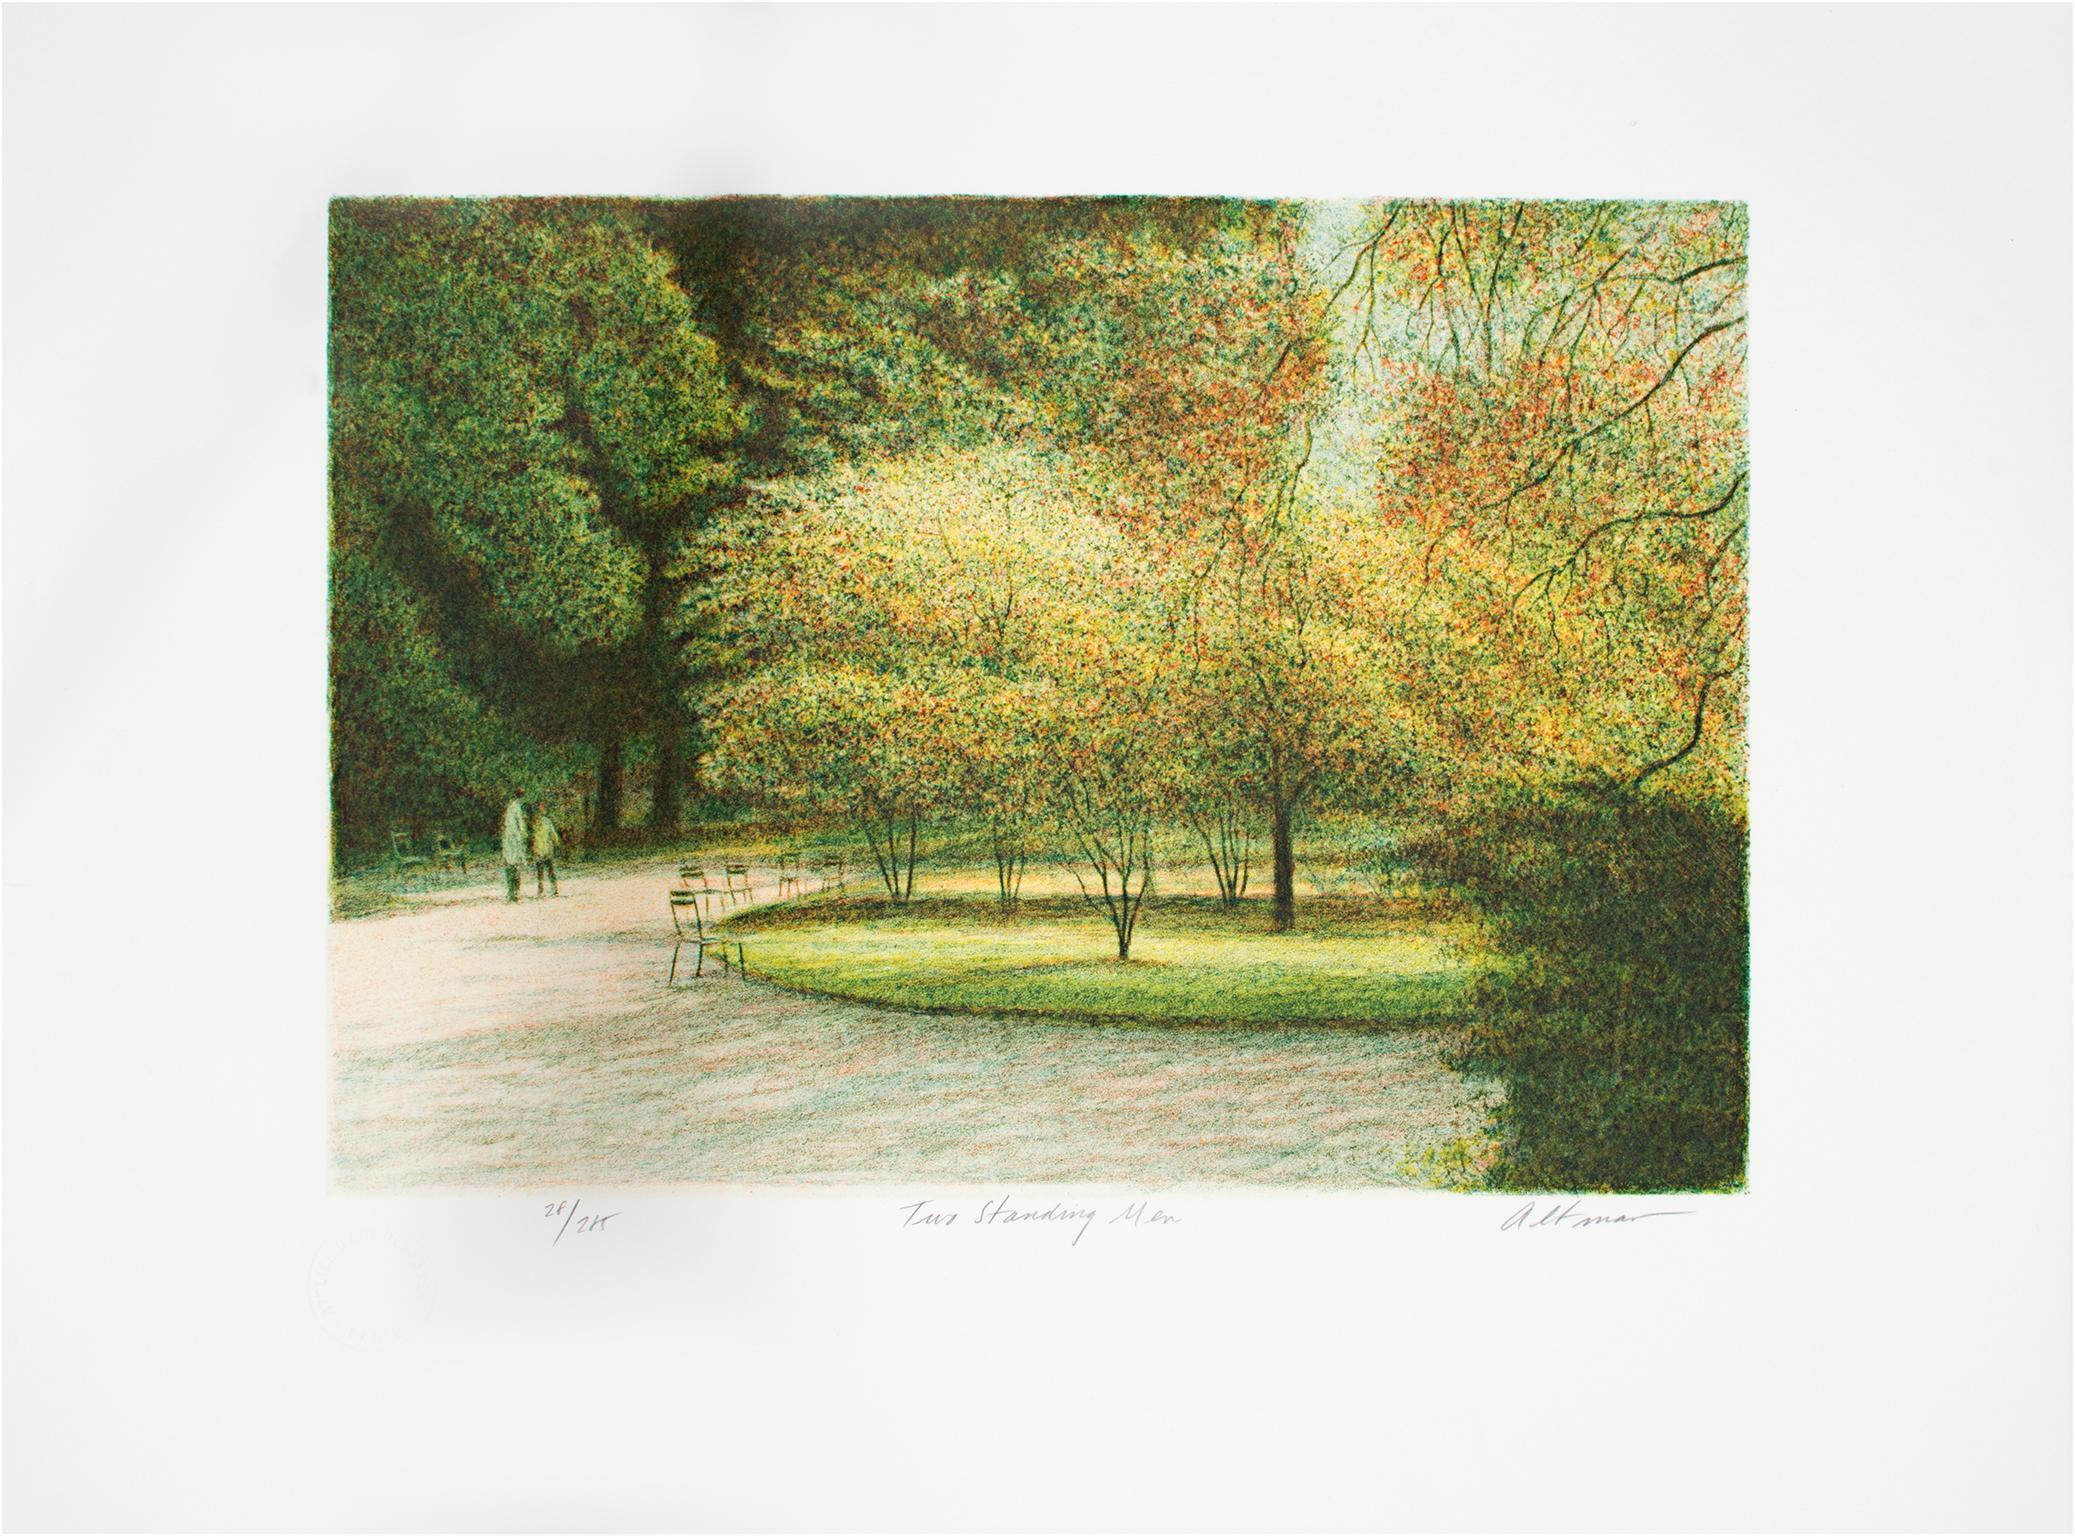  Contemporary color lithograph landscape trees outdoor forest park scene signed